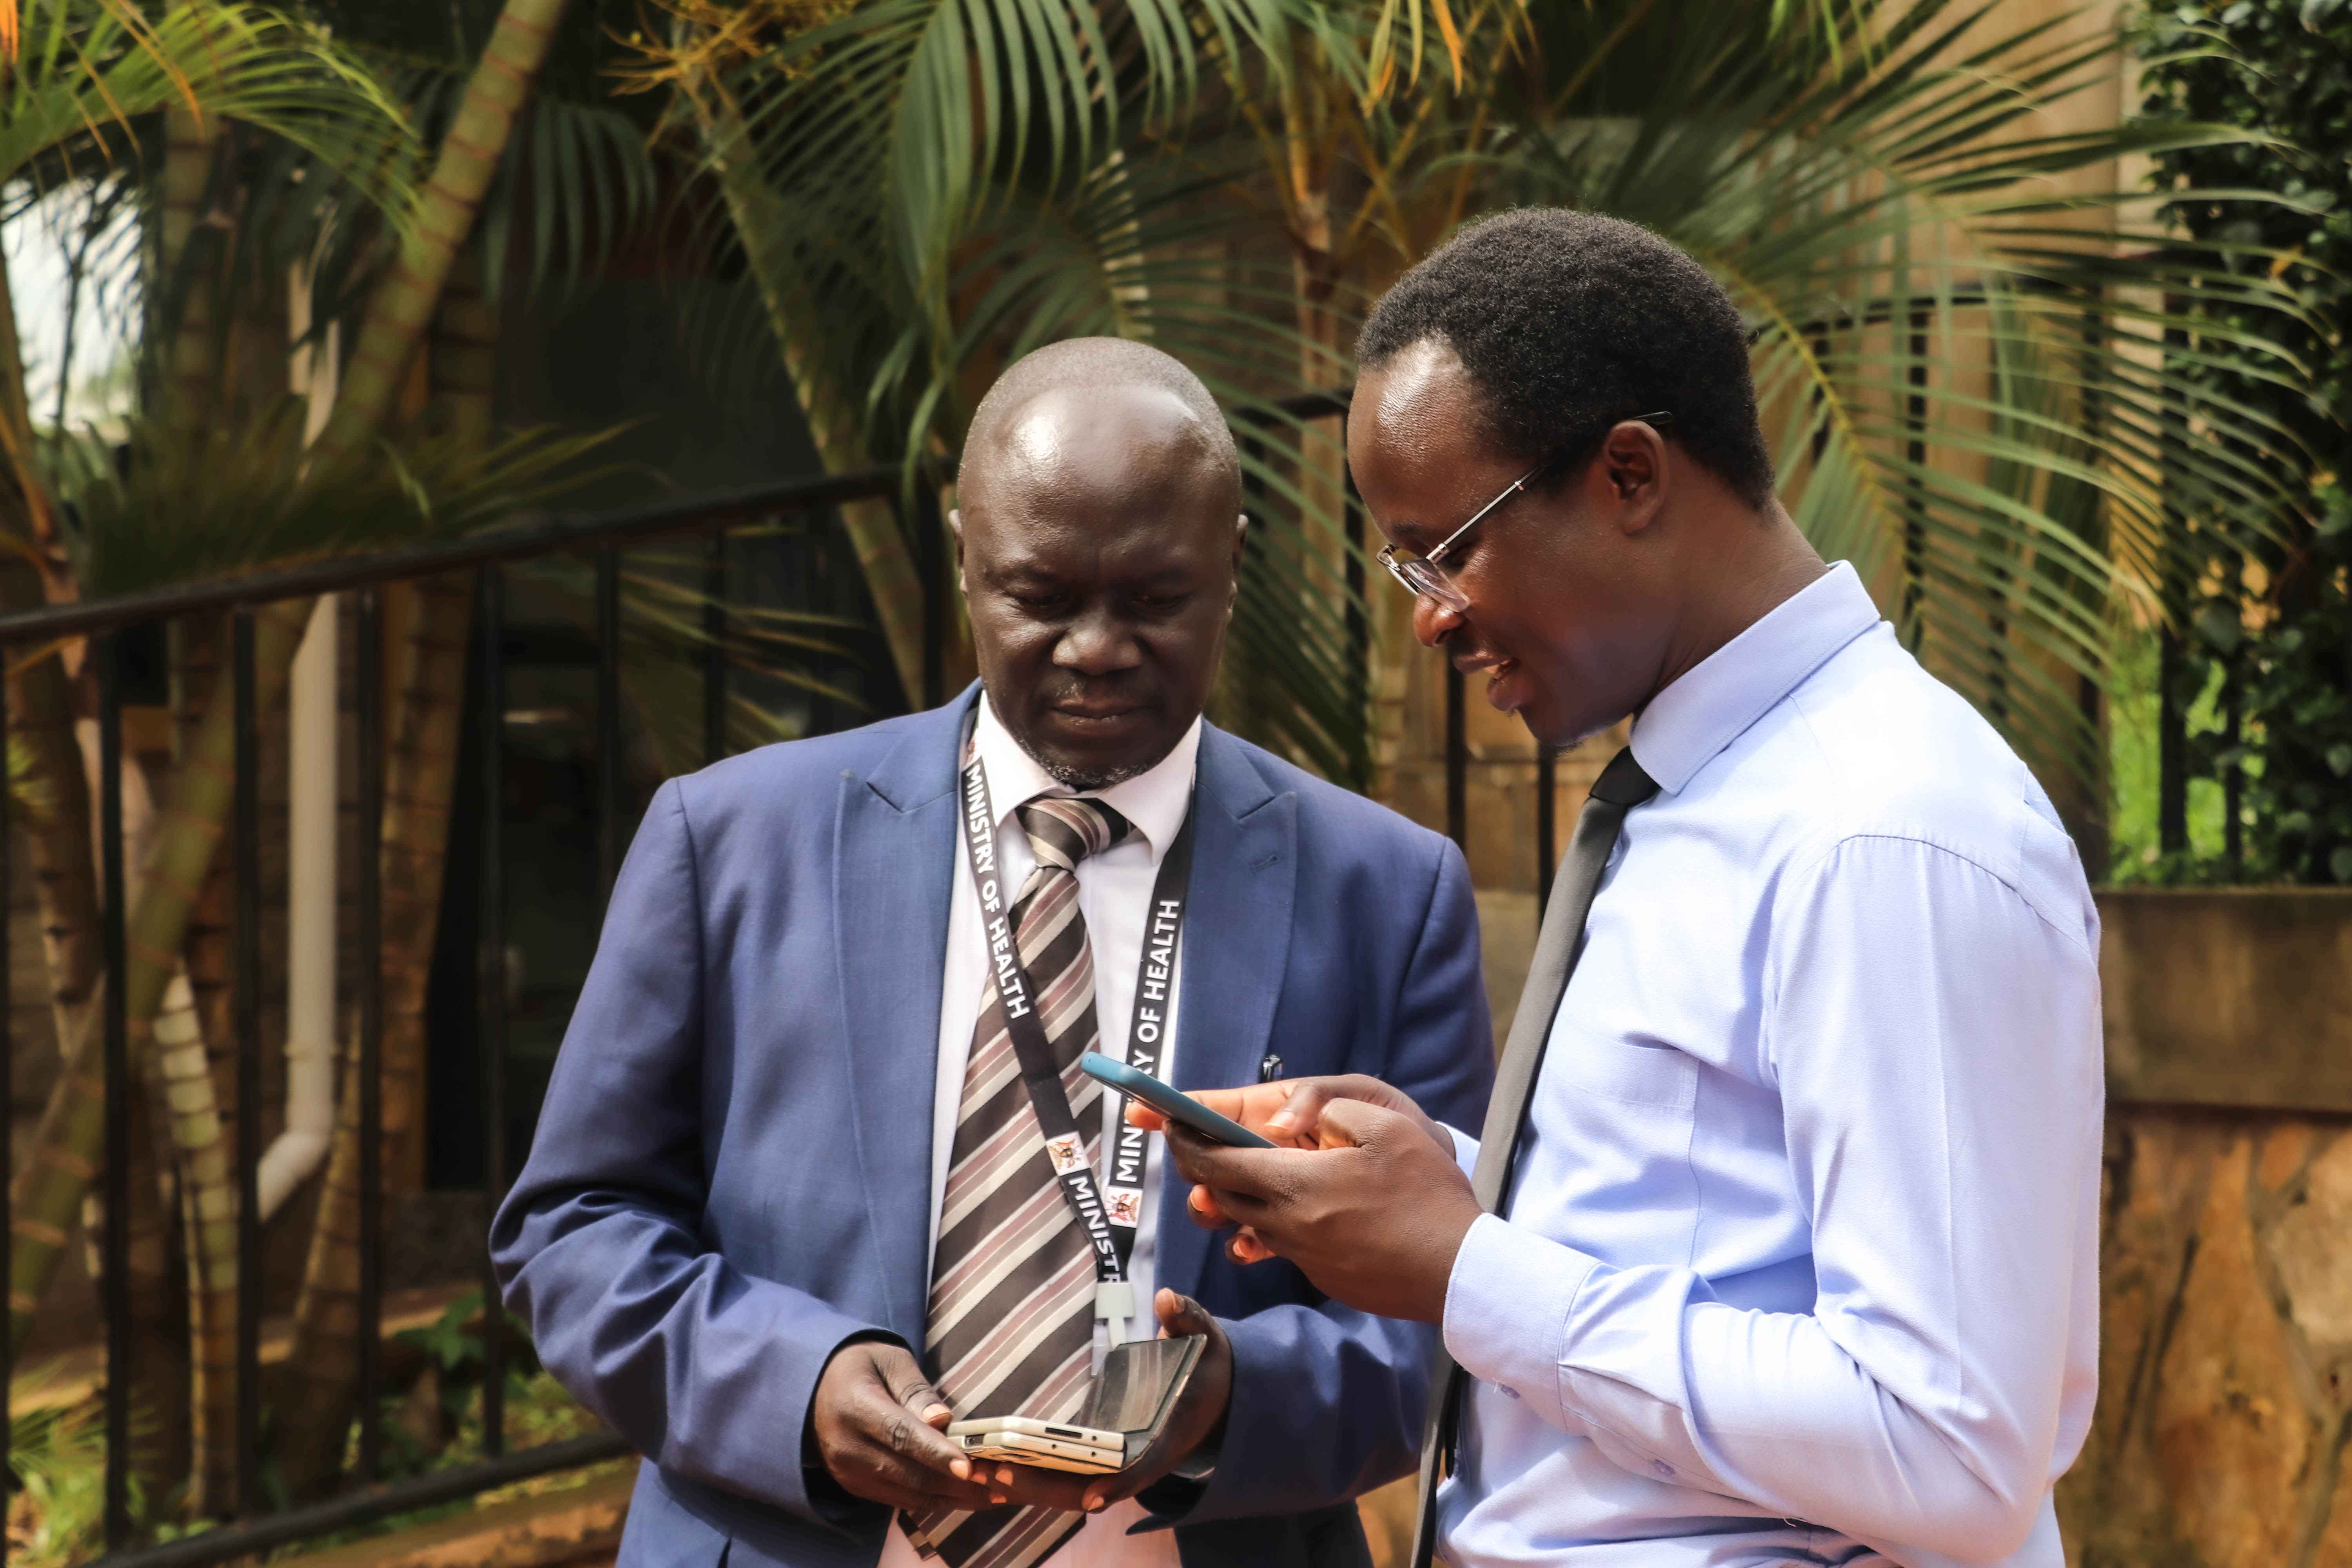 Dr. Simple Ouma from TASO Uganda exchange contacts with Dr. Ronald Miria Ocaatre, the Acting Assistant Commissioner Health Promotion, Education and Communication, Ministry of Health shortly after the event.